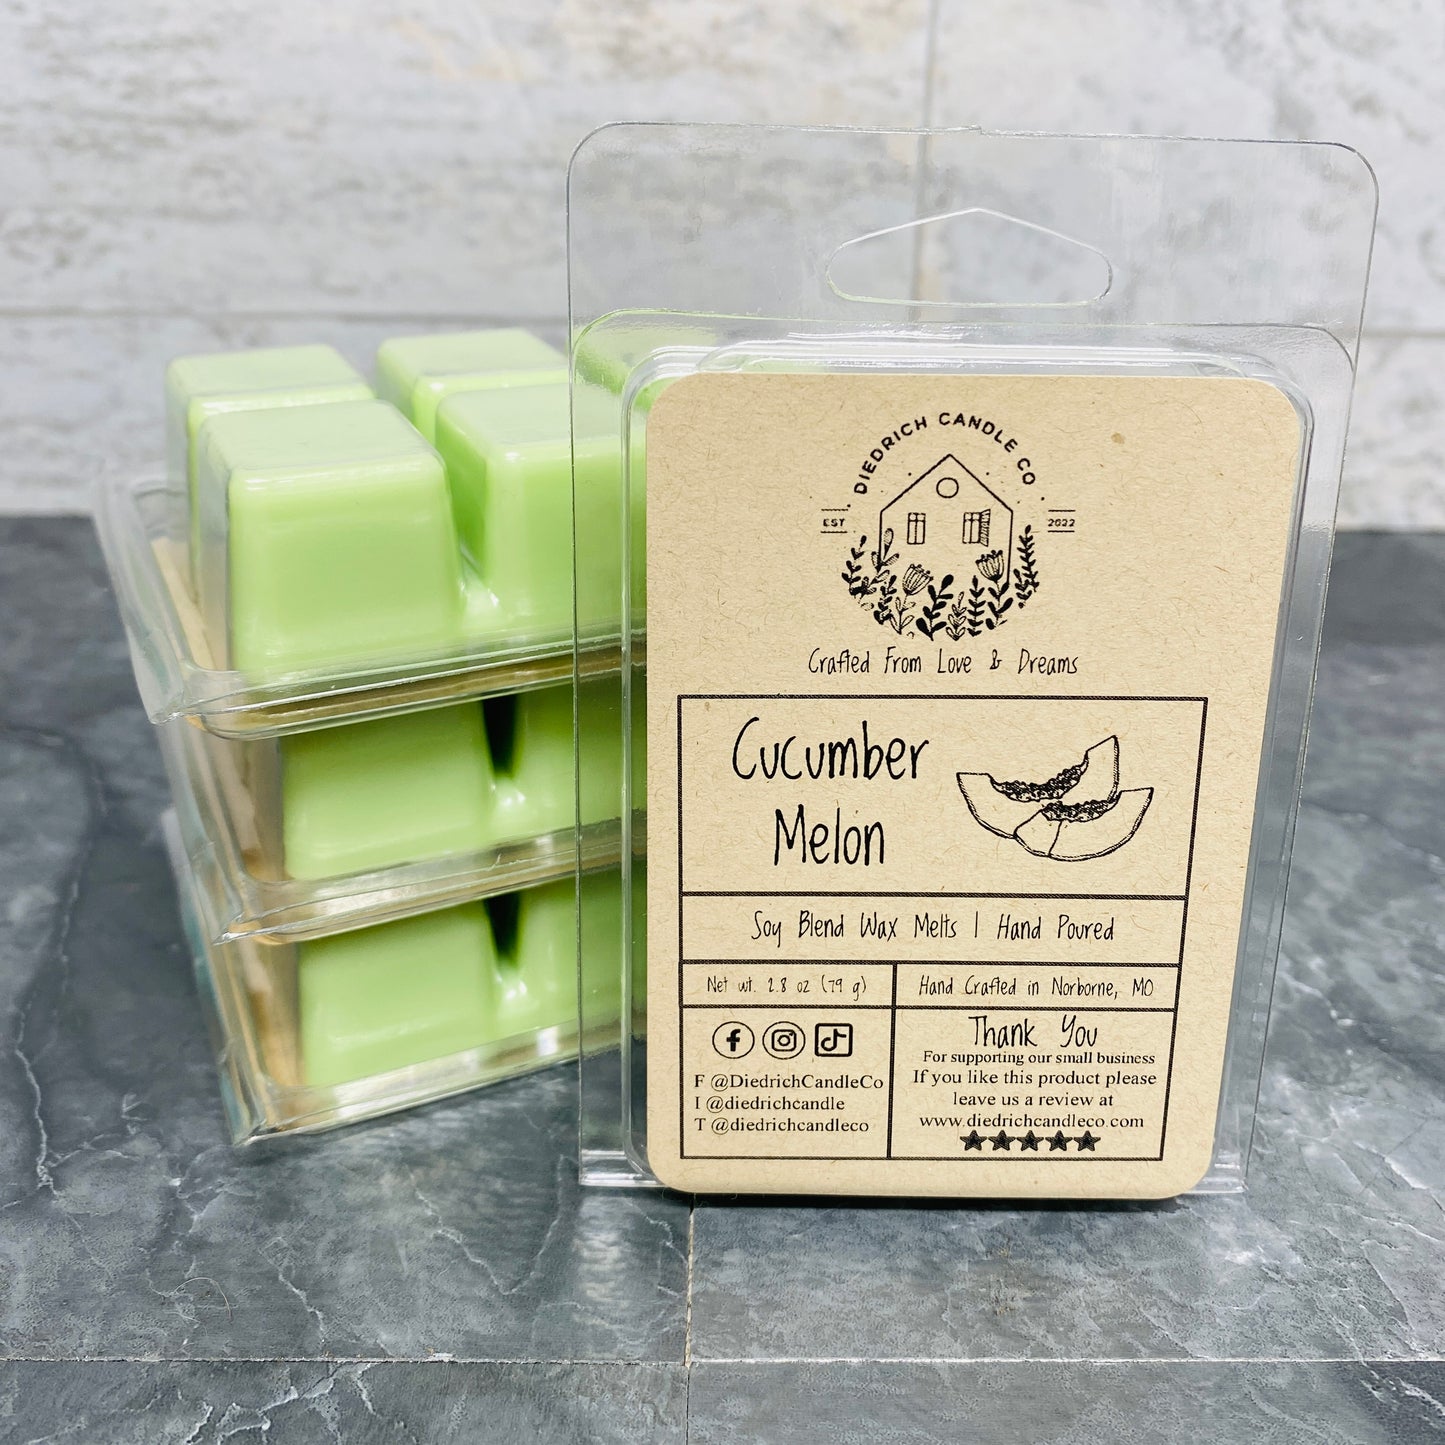 Cucumber Melon | Hand Poured Scented Soy Wax Melt